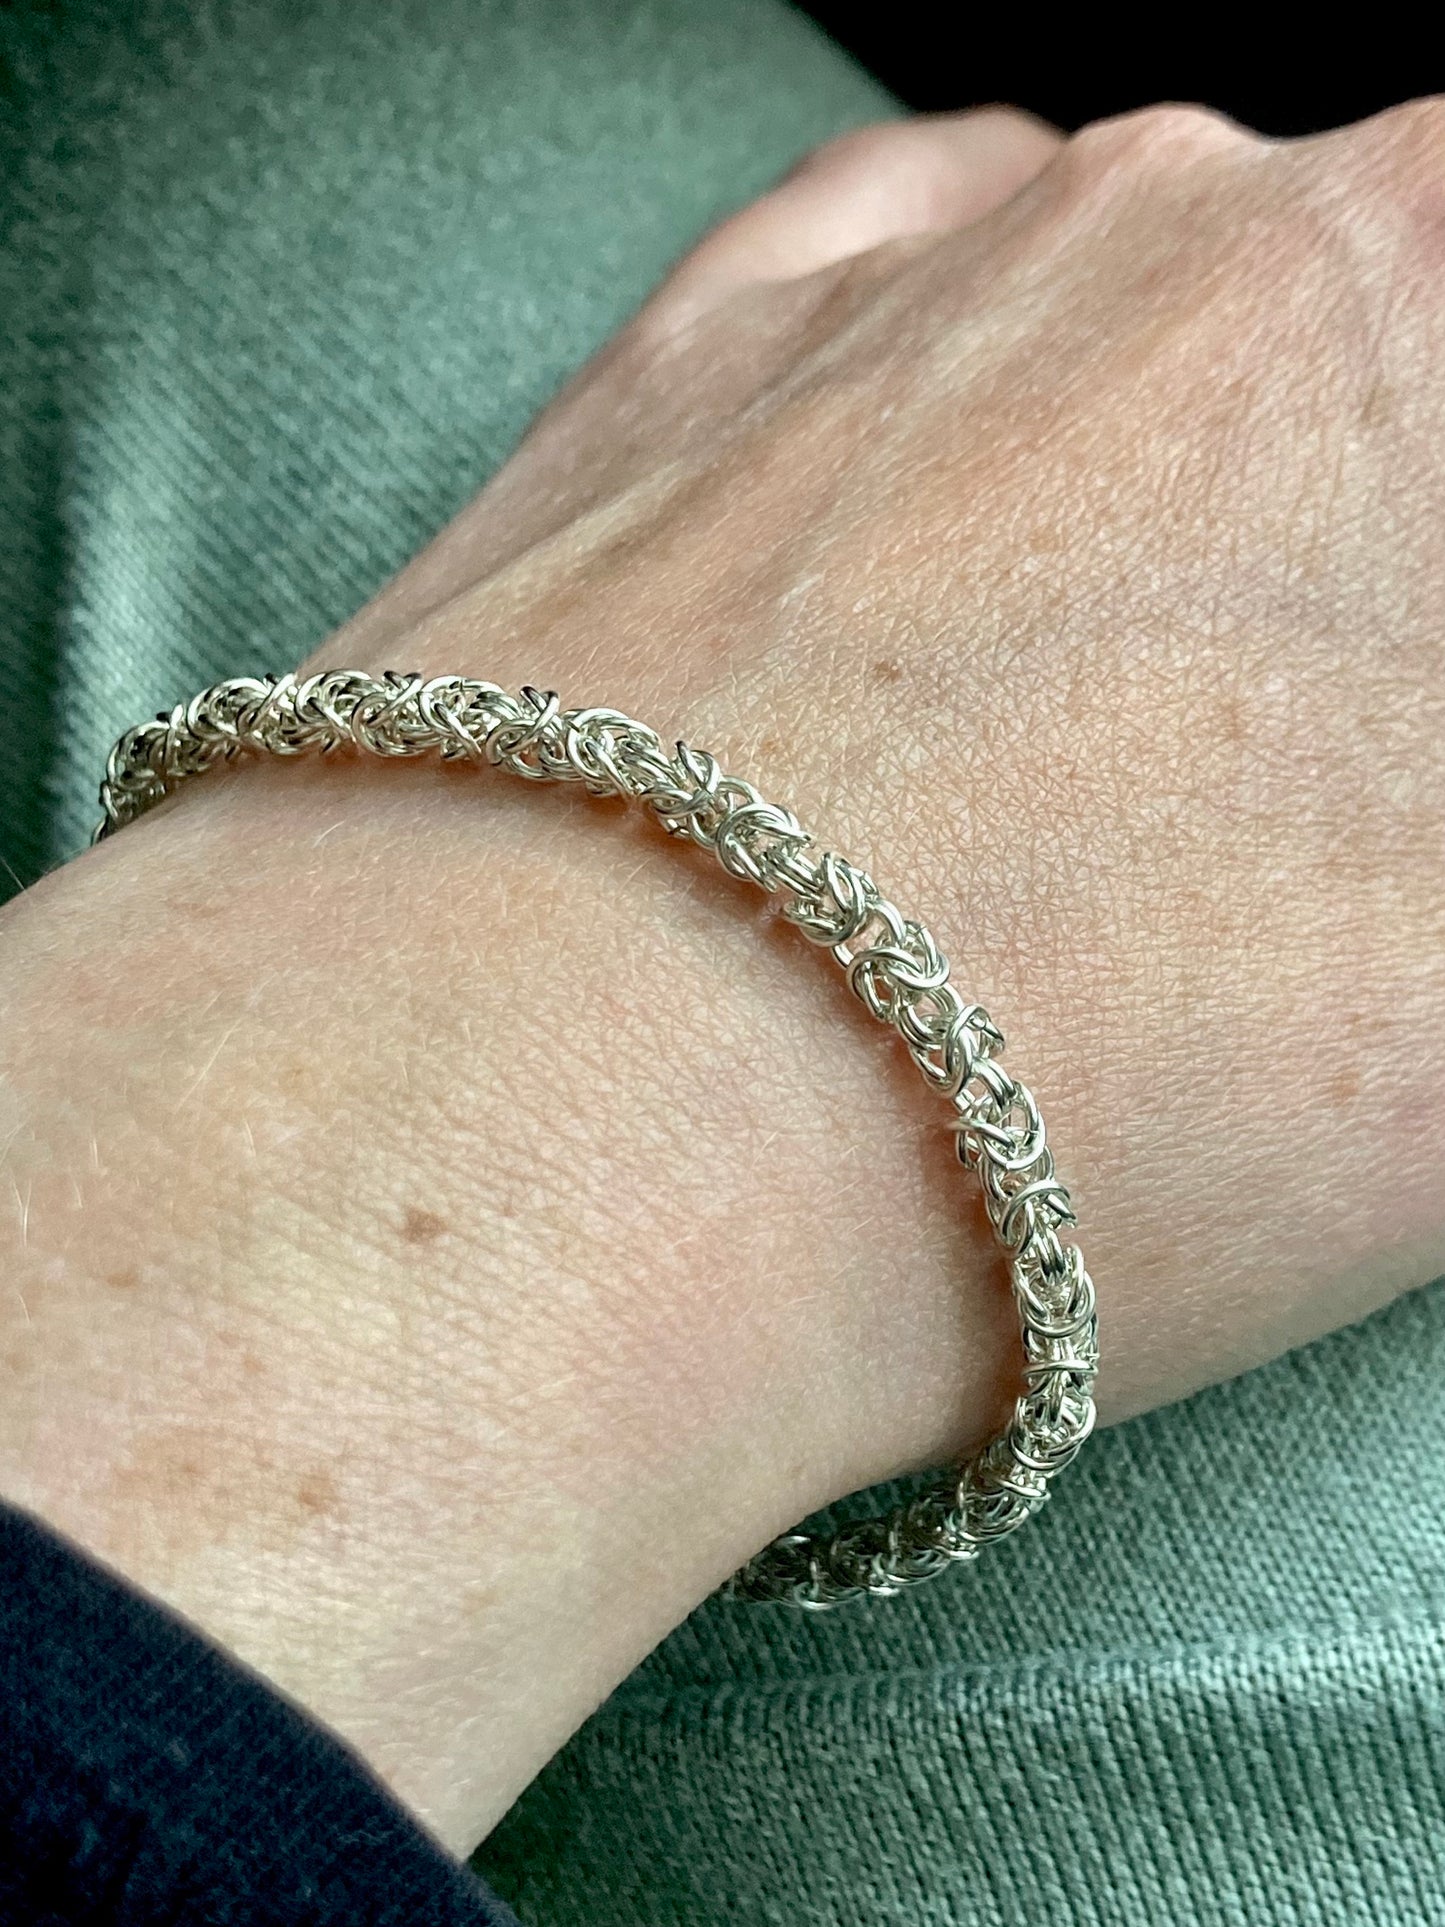 Delicate Byzantine Chainmaille Bracelet in Silver